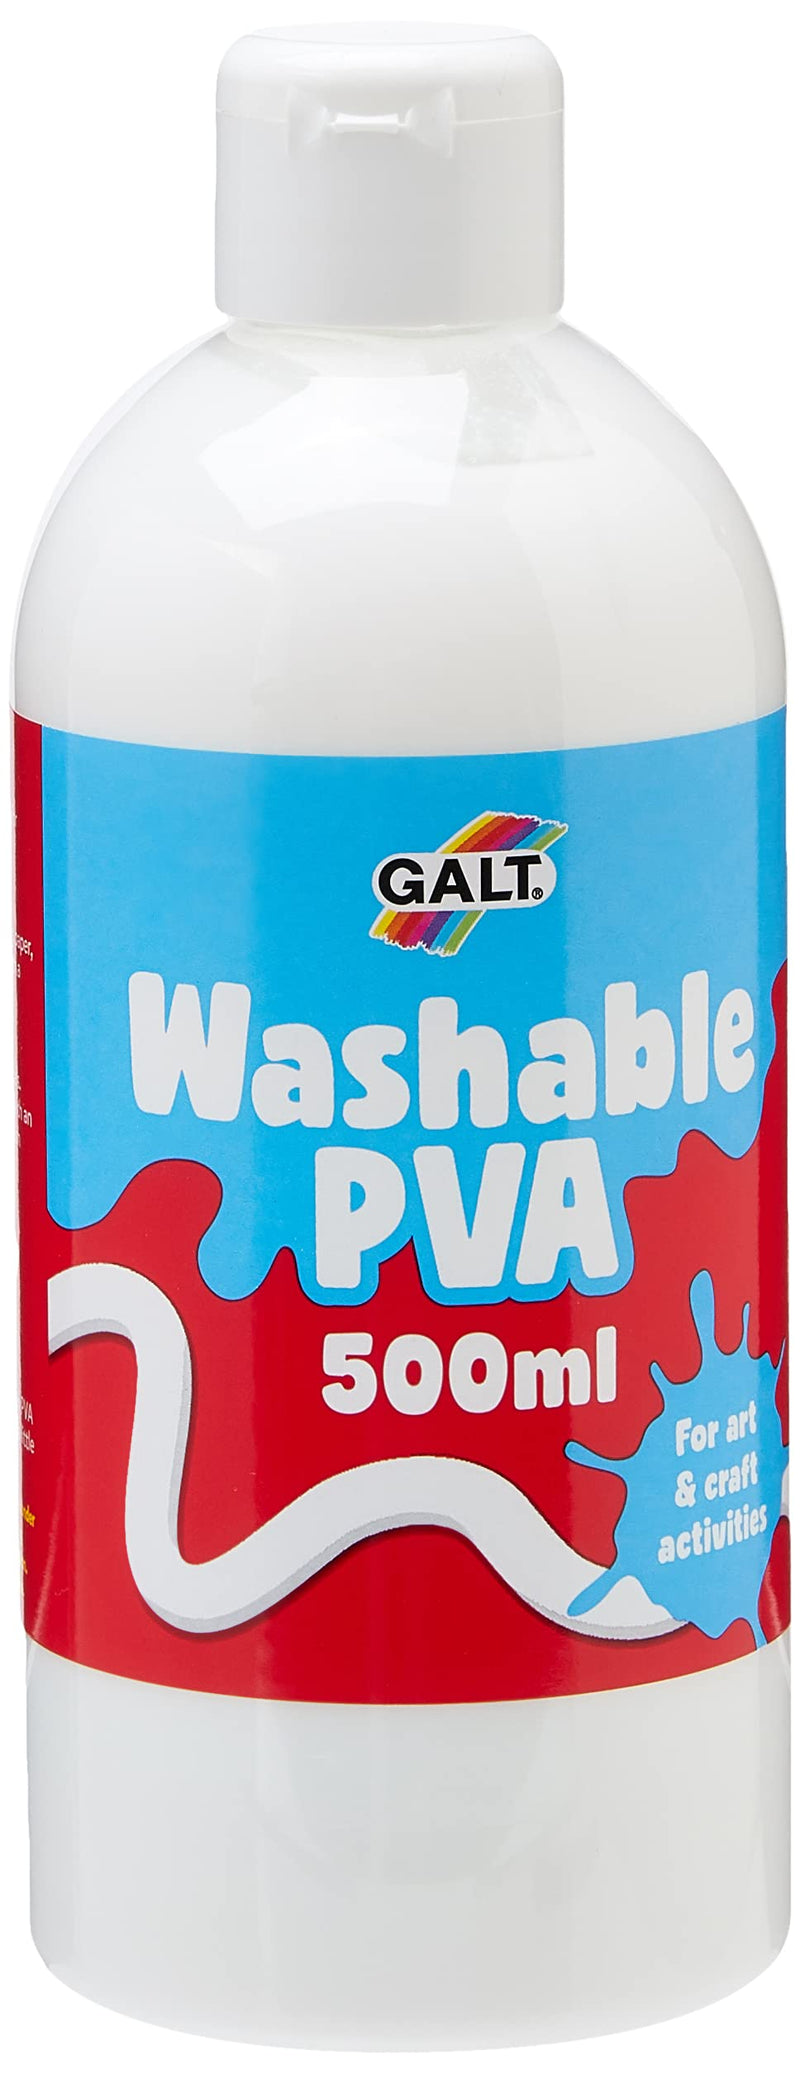 Galt Washable PVA Glue for Crafting, 500ml - Slime Making Easy Clean Kids Glue, Washes Out of Clothes - Clear Arts and Crafts Glue for Paper, Card, Wood and Fabrics - Children Safe, Ages 3 Years Plus